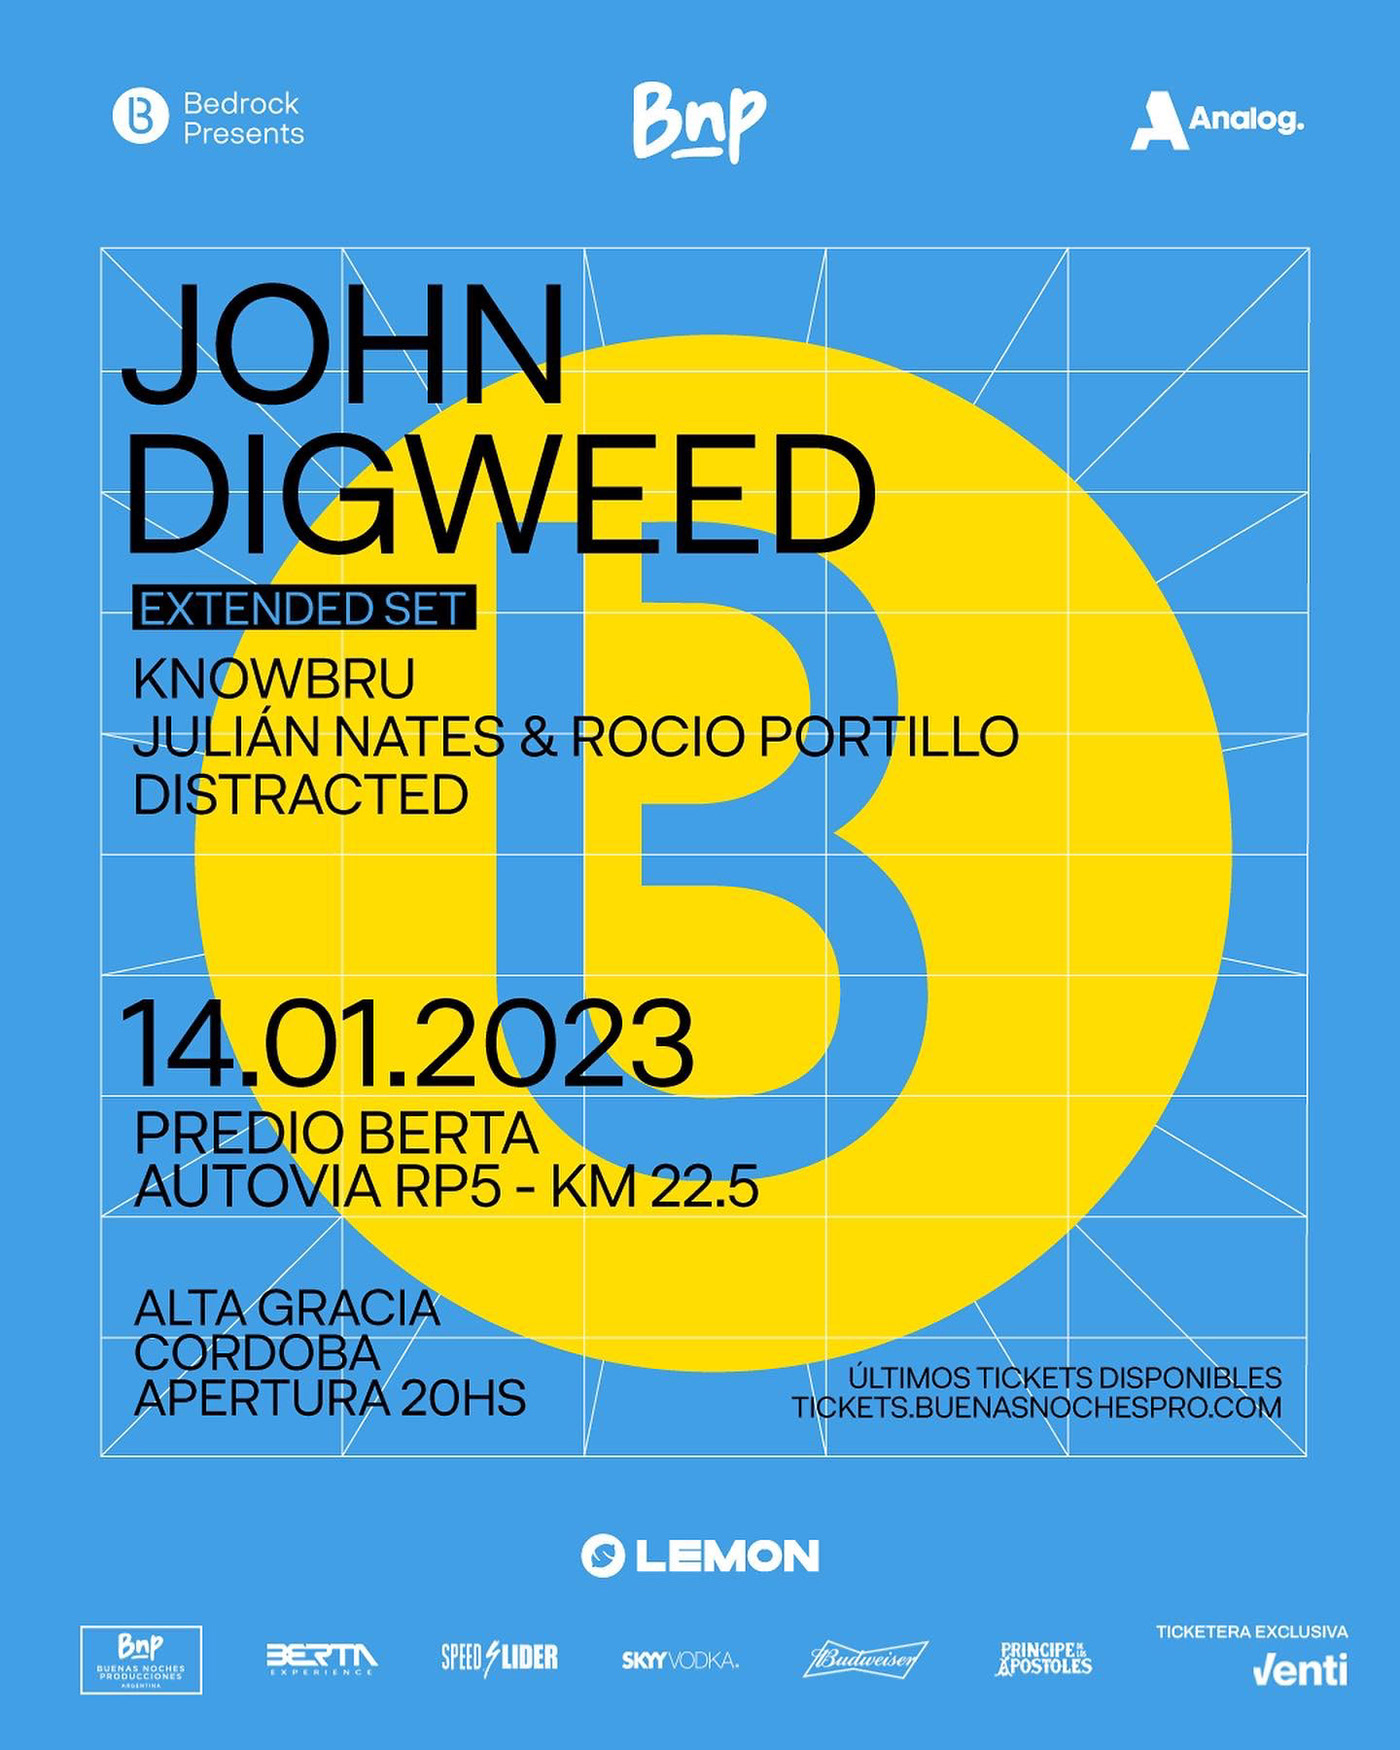 bedrock dance floor electronic music festival John Digweed music musica electronica party progressive house Show